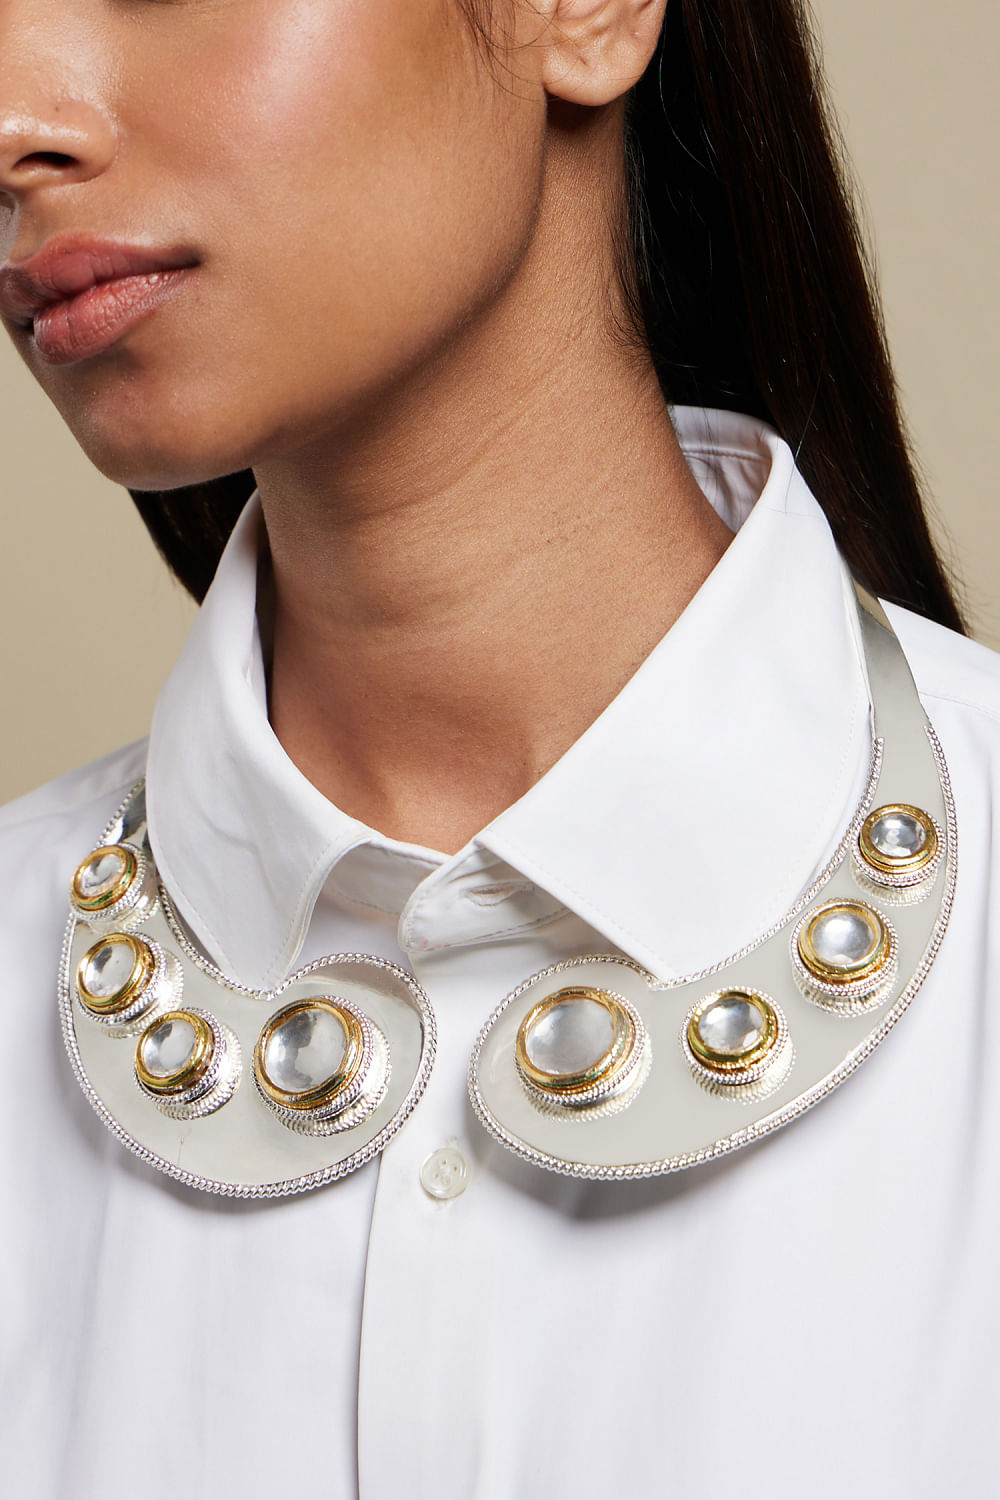 FAXHION Round White Pearl Necklace Choker, Multi Strands India | Ubuy